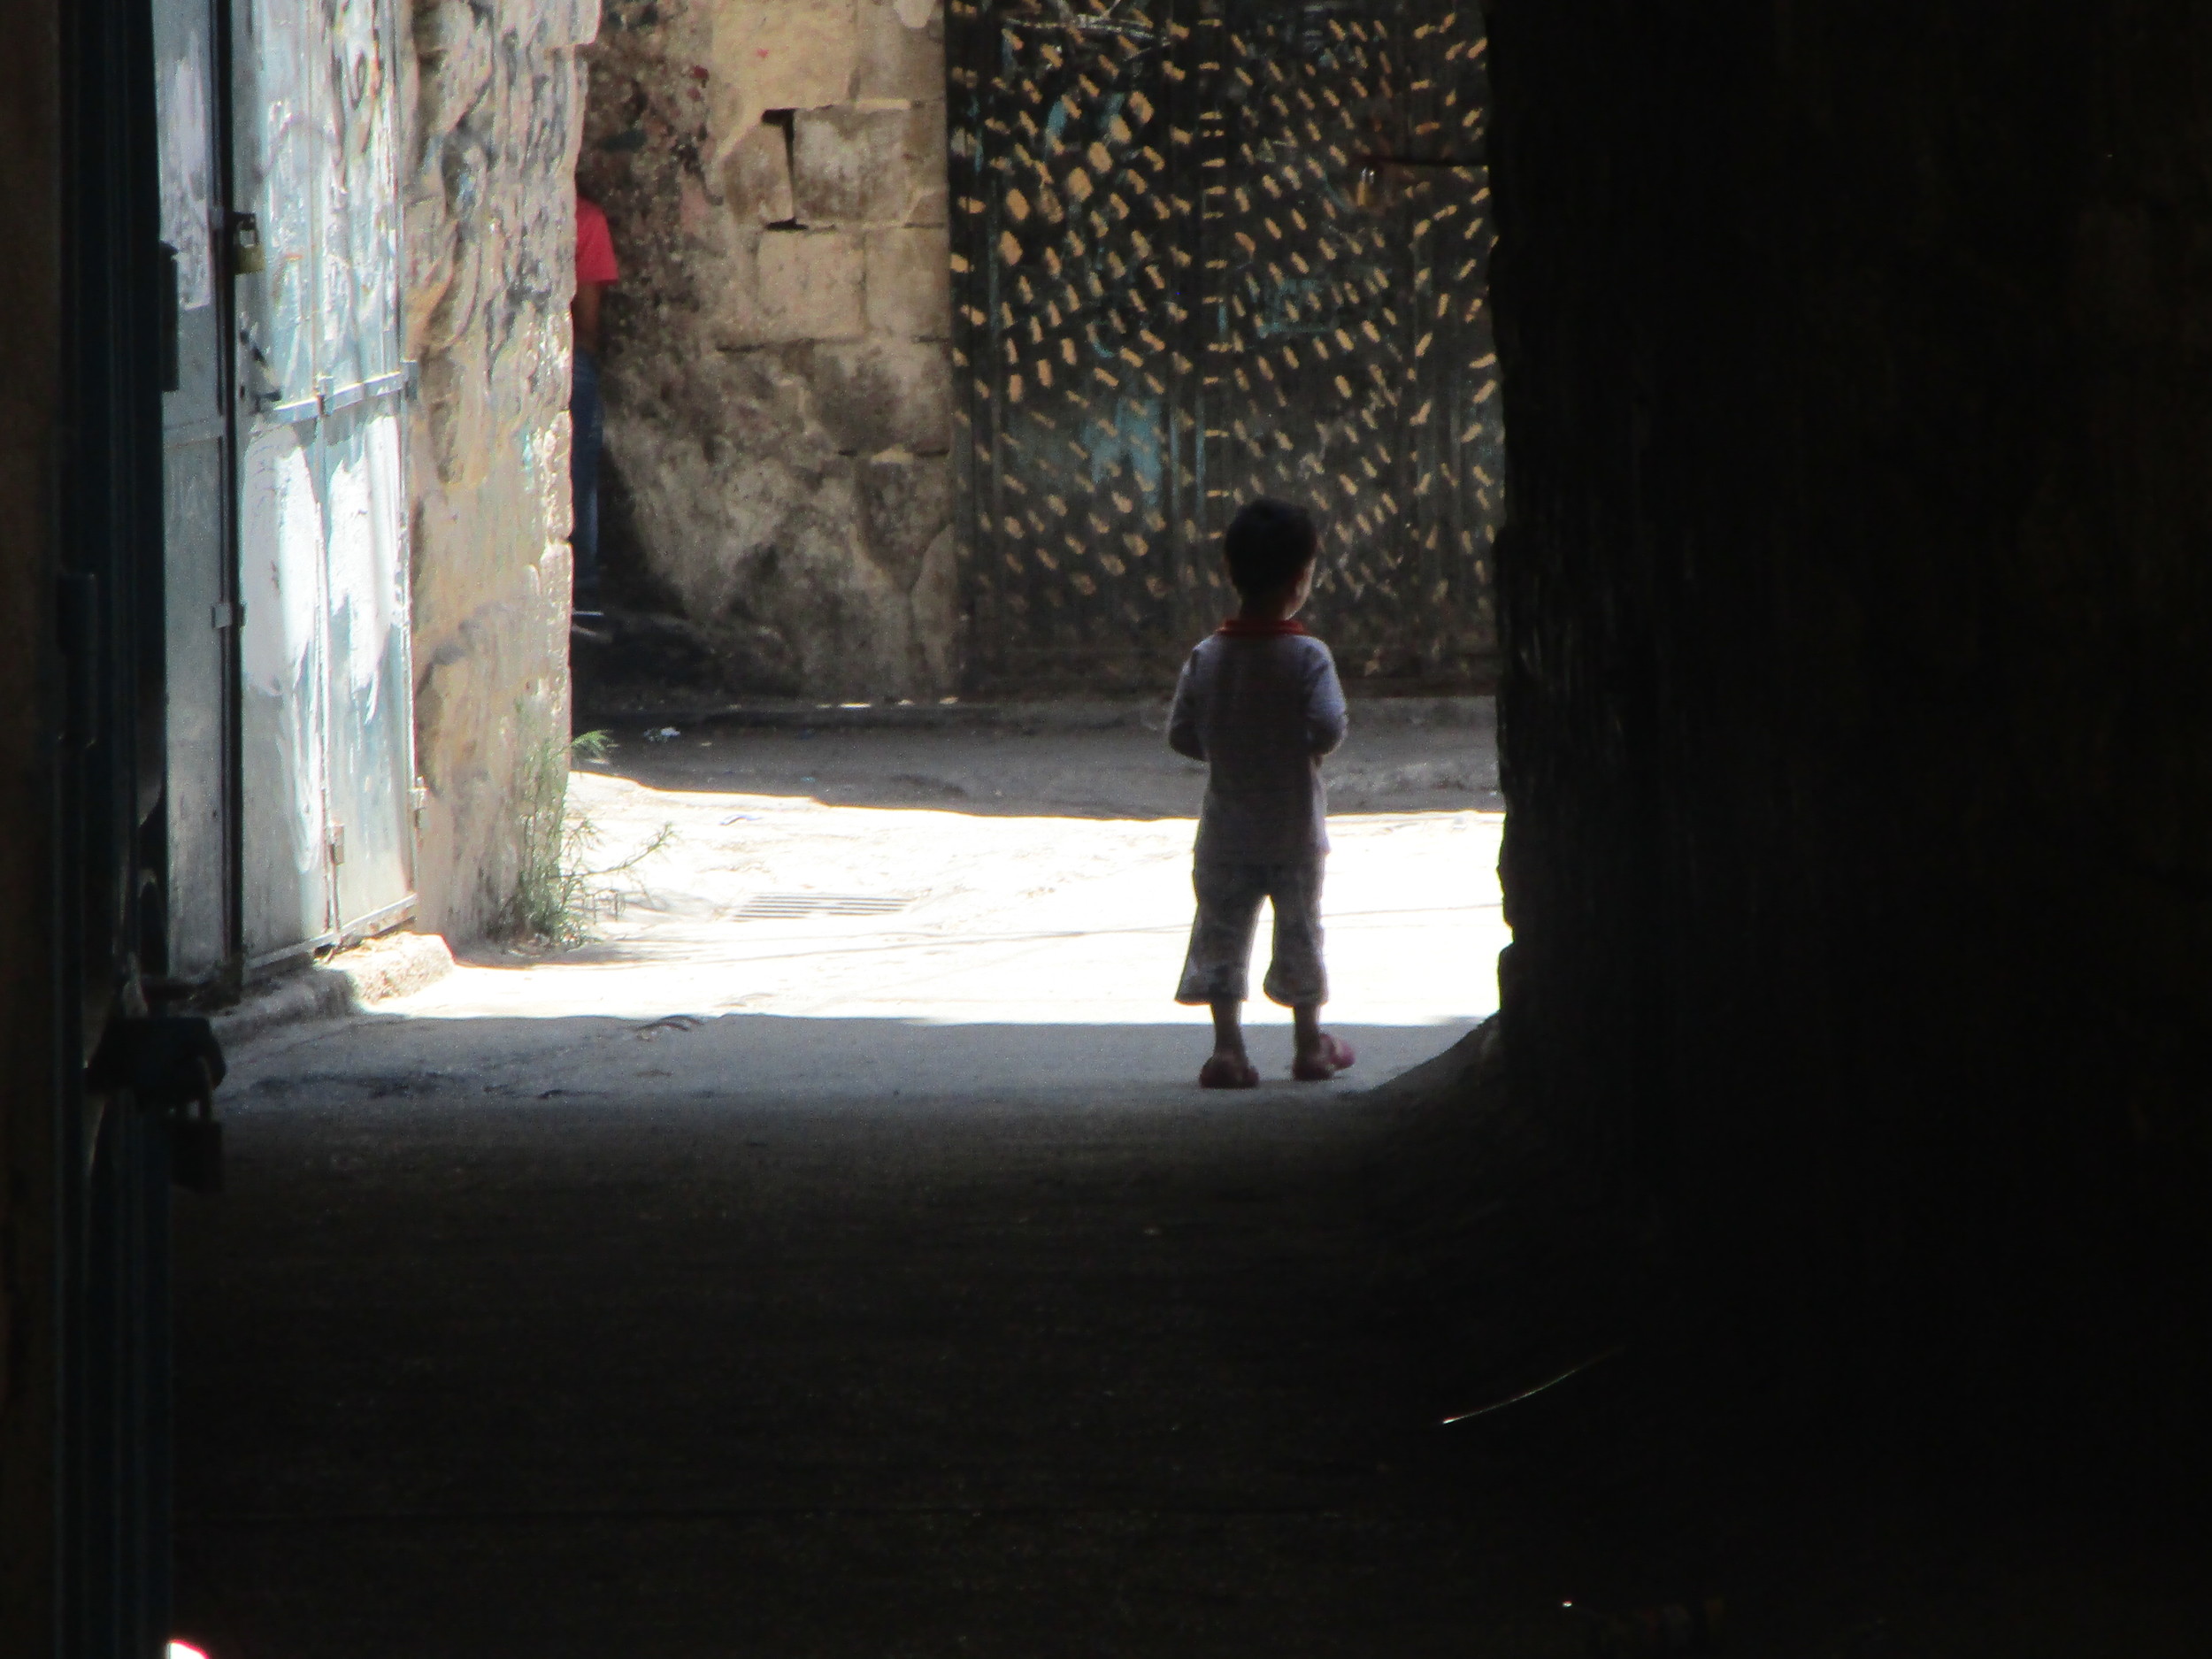  I took this while walking the streets of a 3,500 year-old city, called Nablus. This is located in Palestinian occupied territory where we served the kids. Unbelievable poverty. 